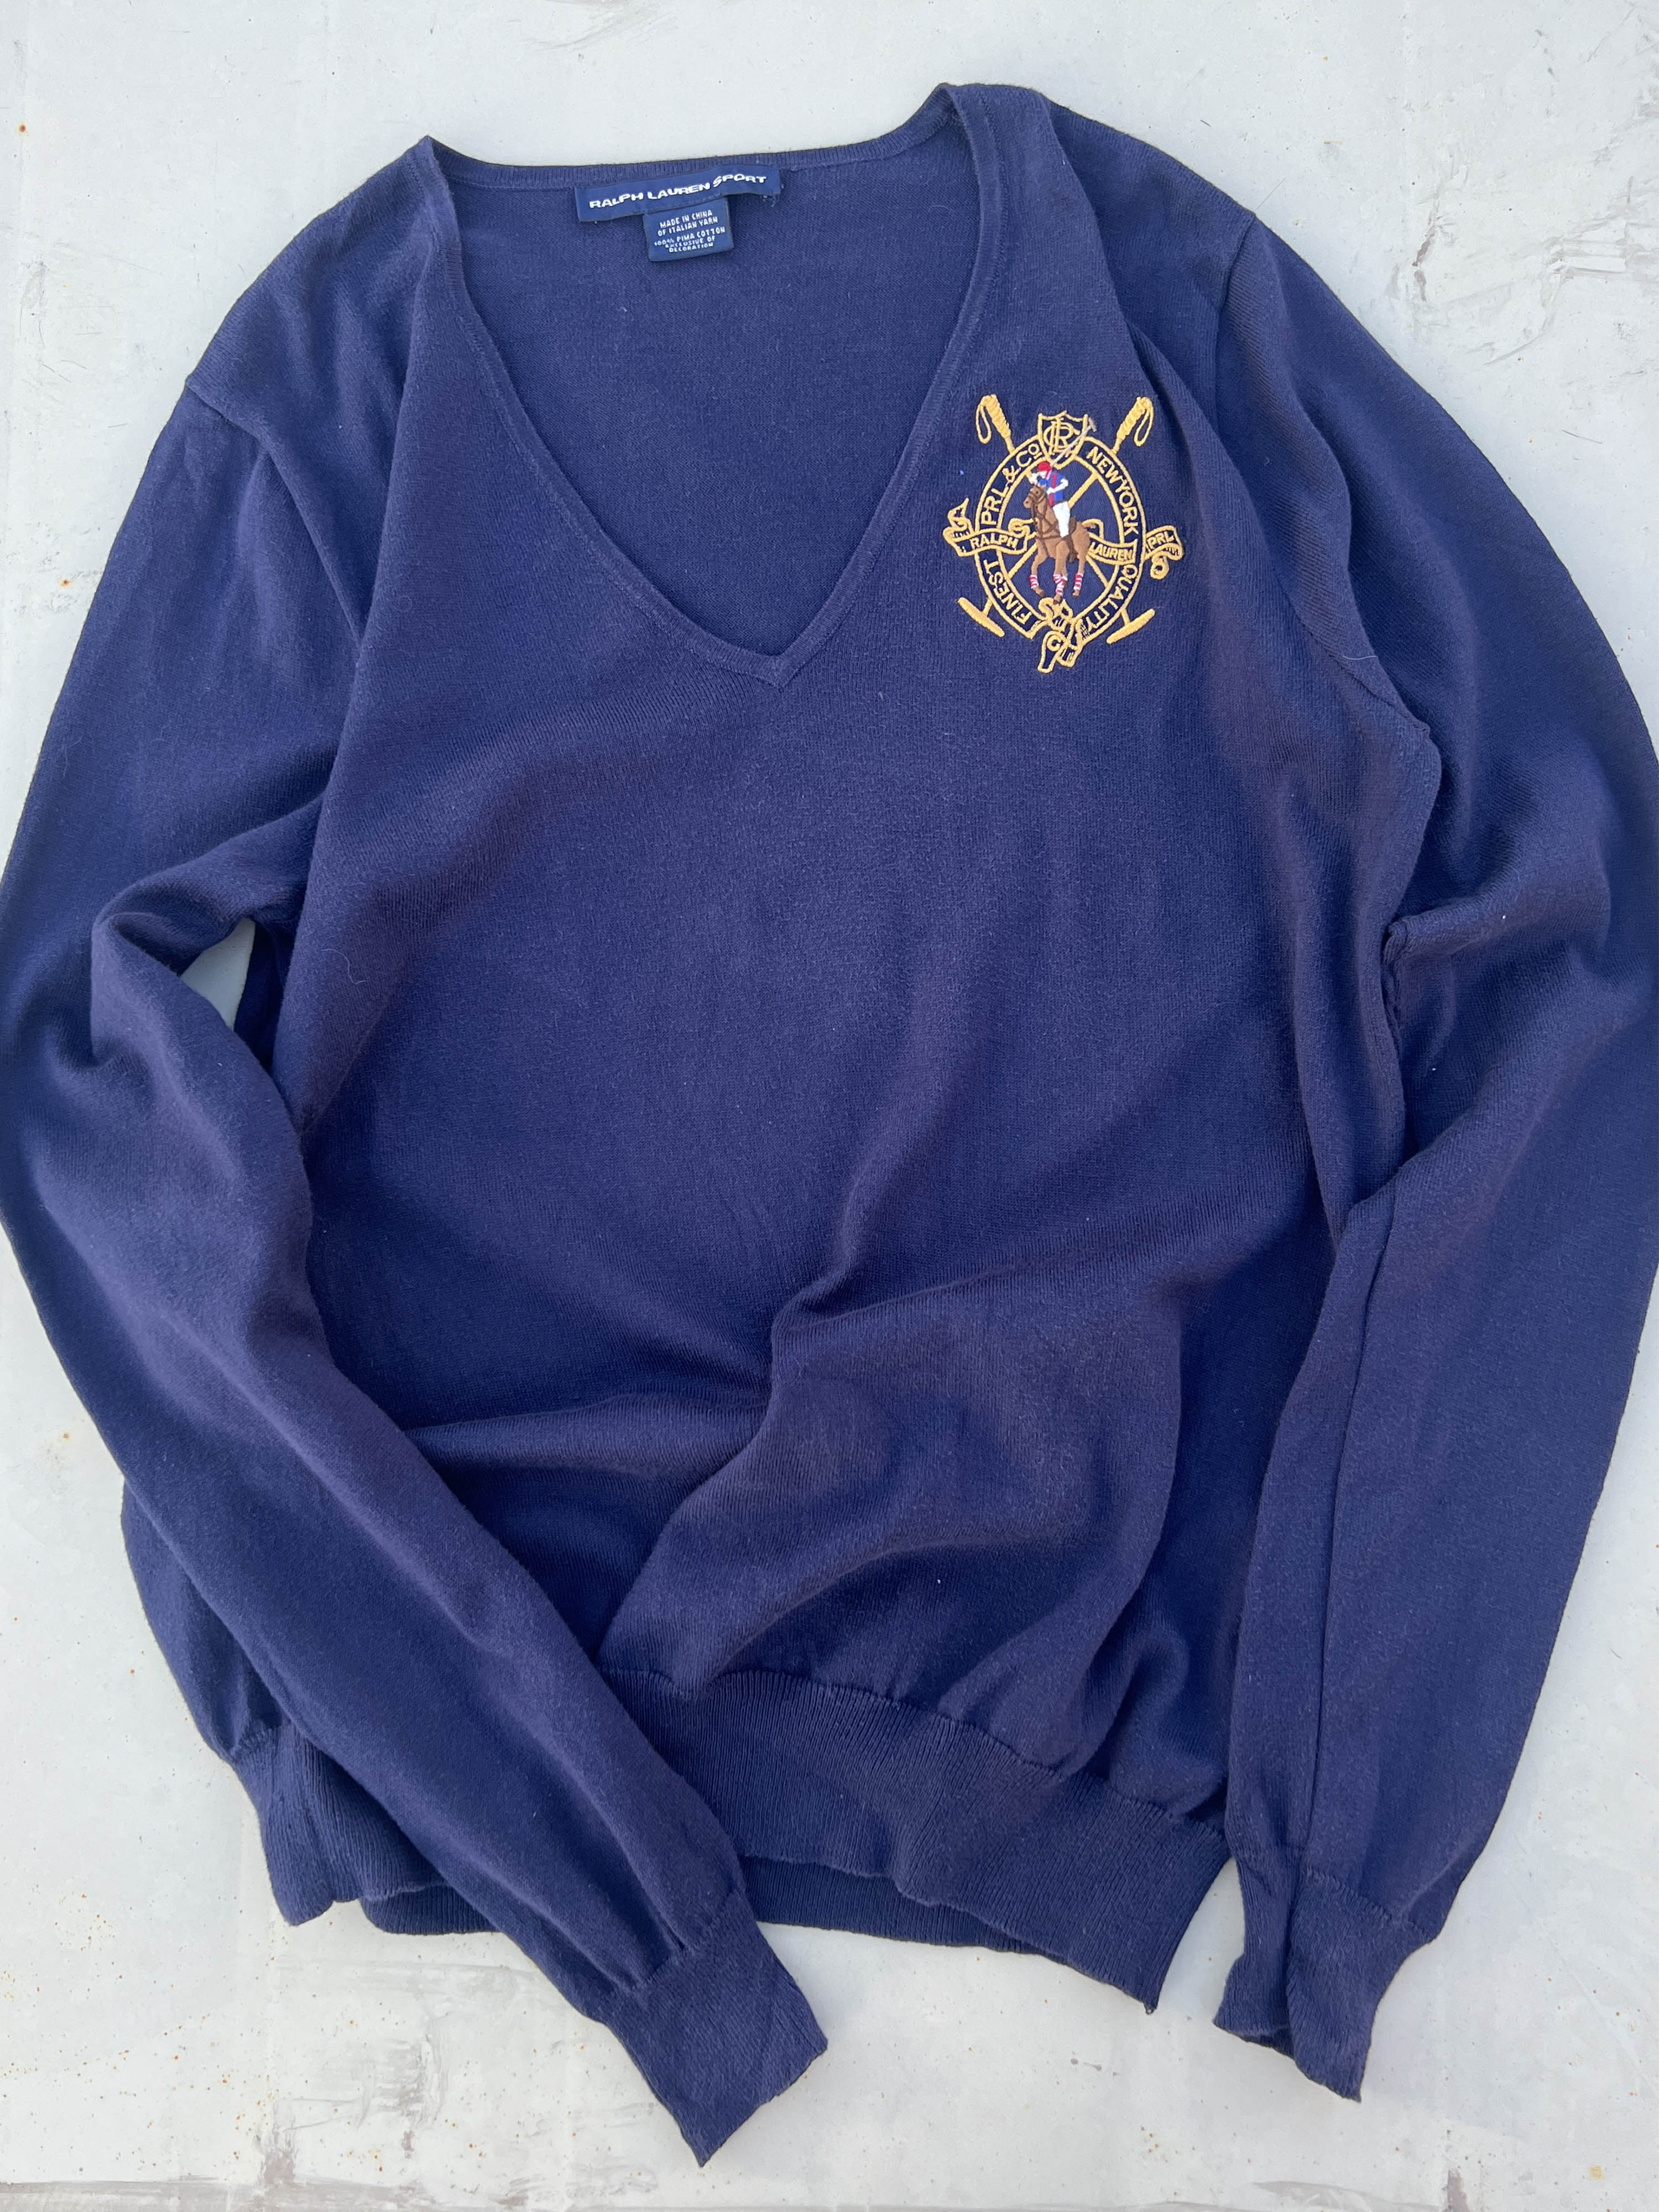 Polo by Ralph Lauren v-neck knit